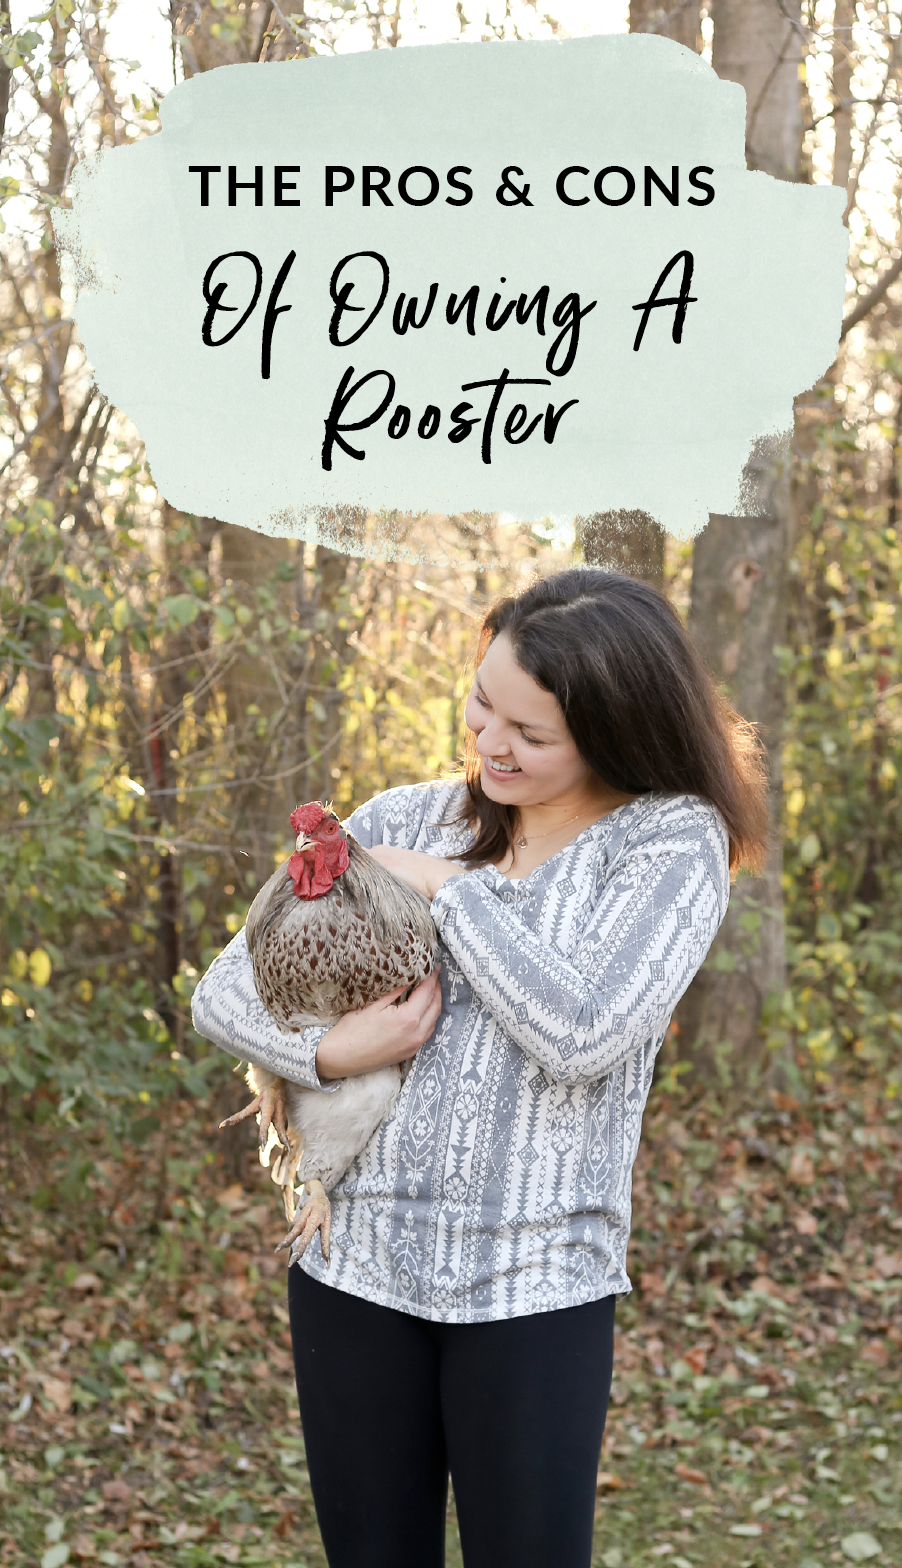 The pros and cons of owning a rooster. Should you get a rooster for your flock of chickens?